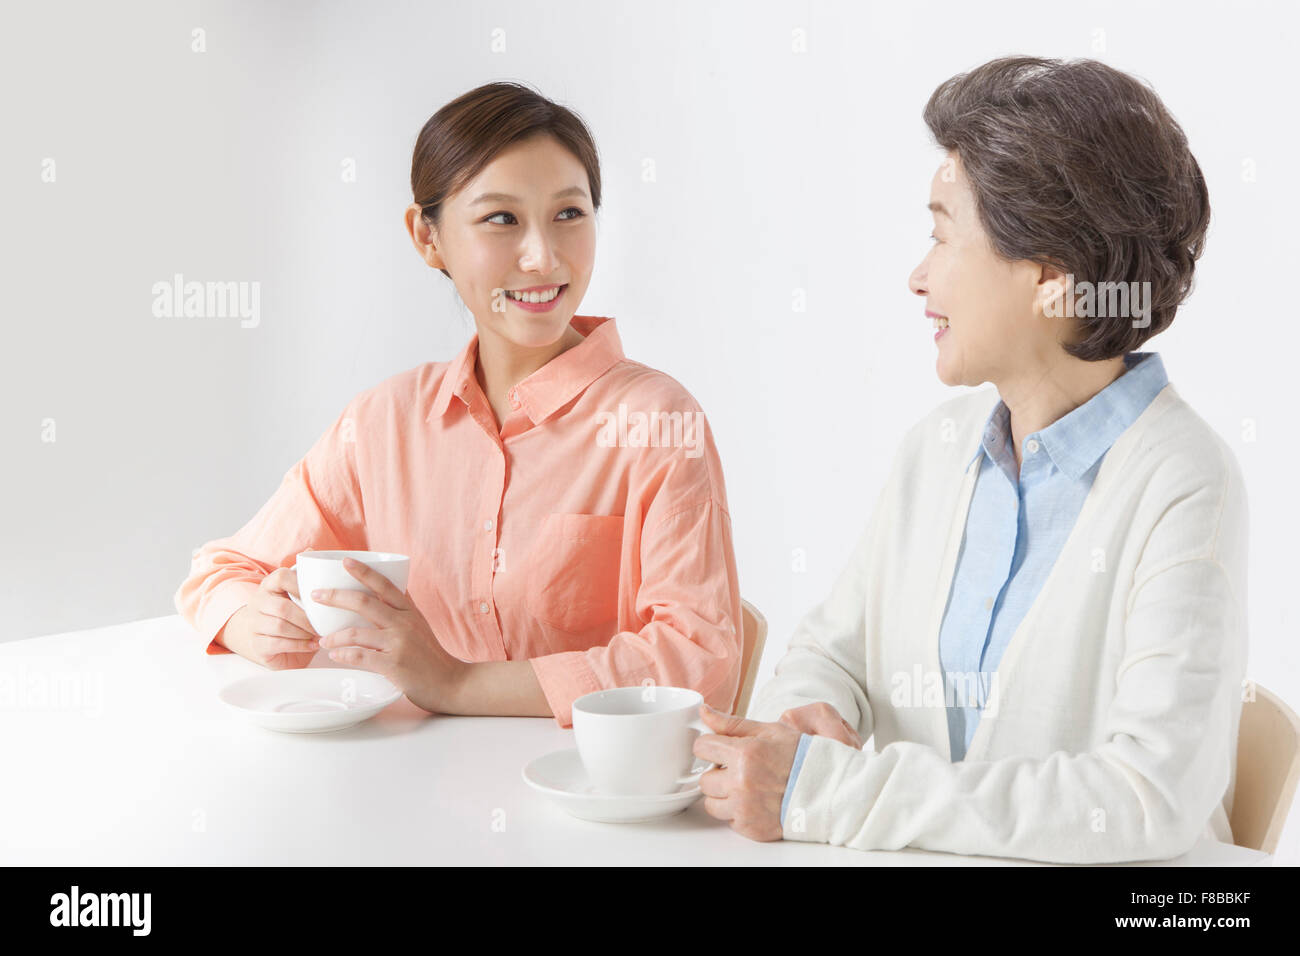 Mother and daughter sitting at table and having tea time Stock Photo